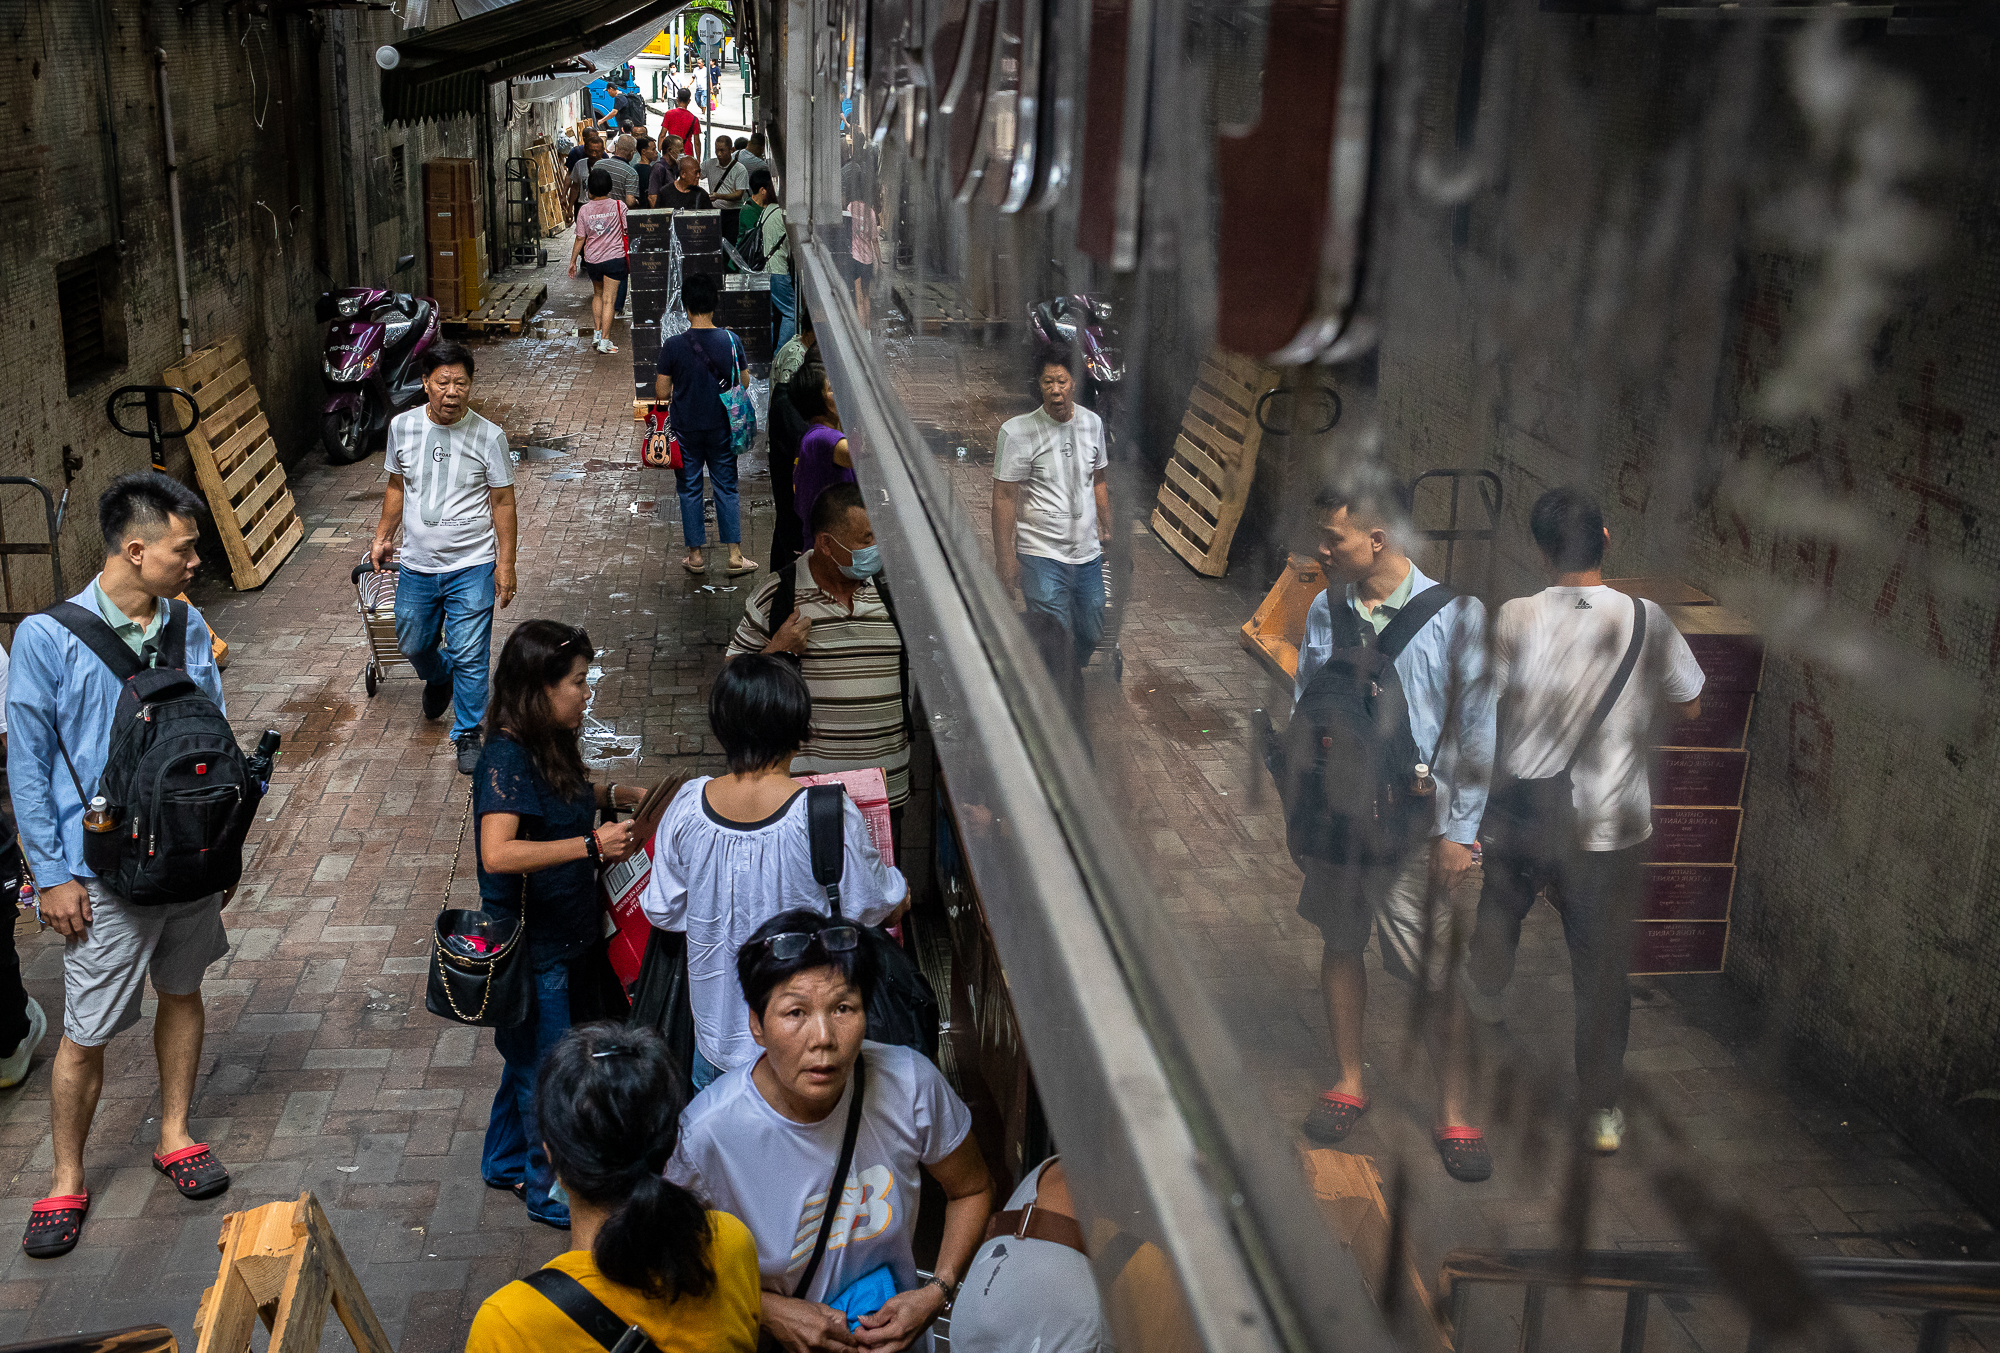 Shoppers buy drinks in an alley next to the Border Gate